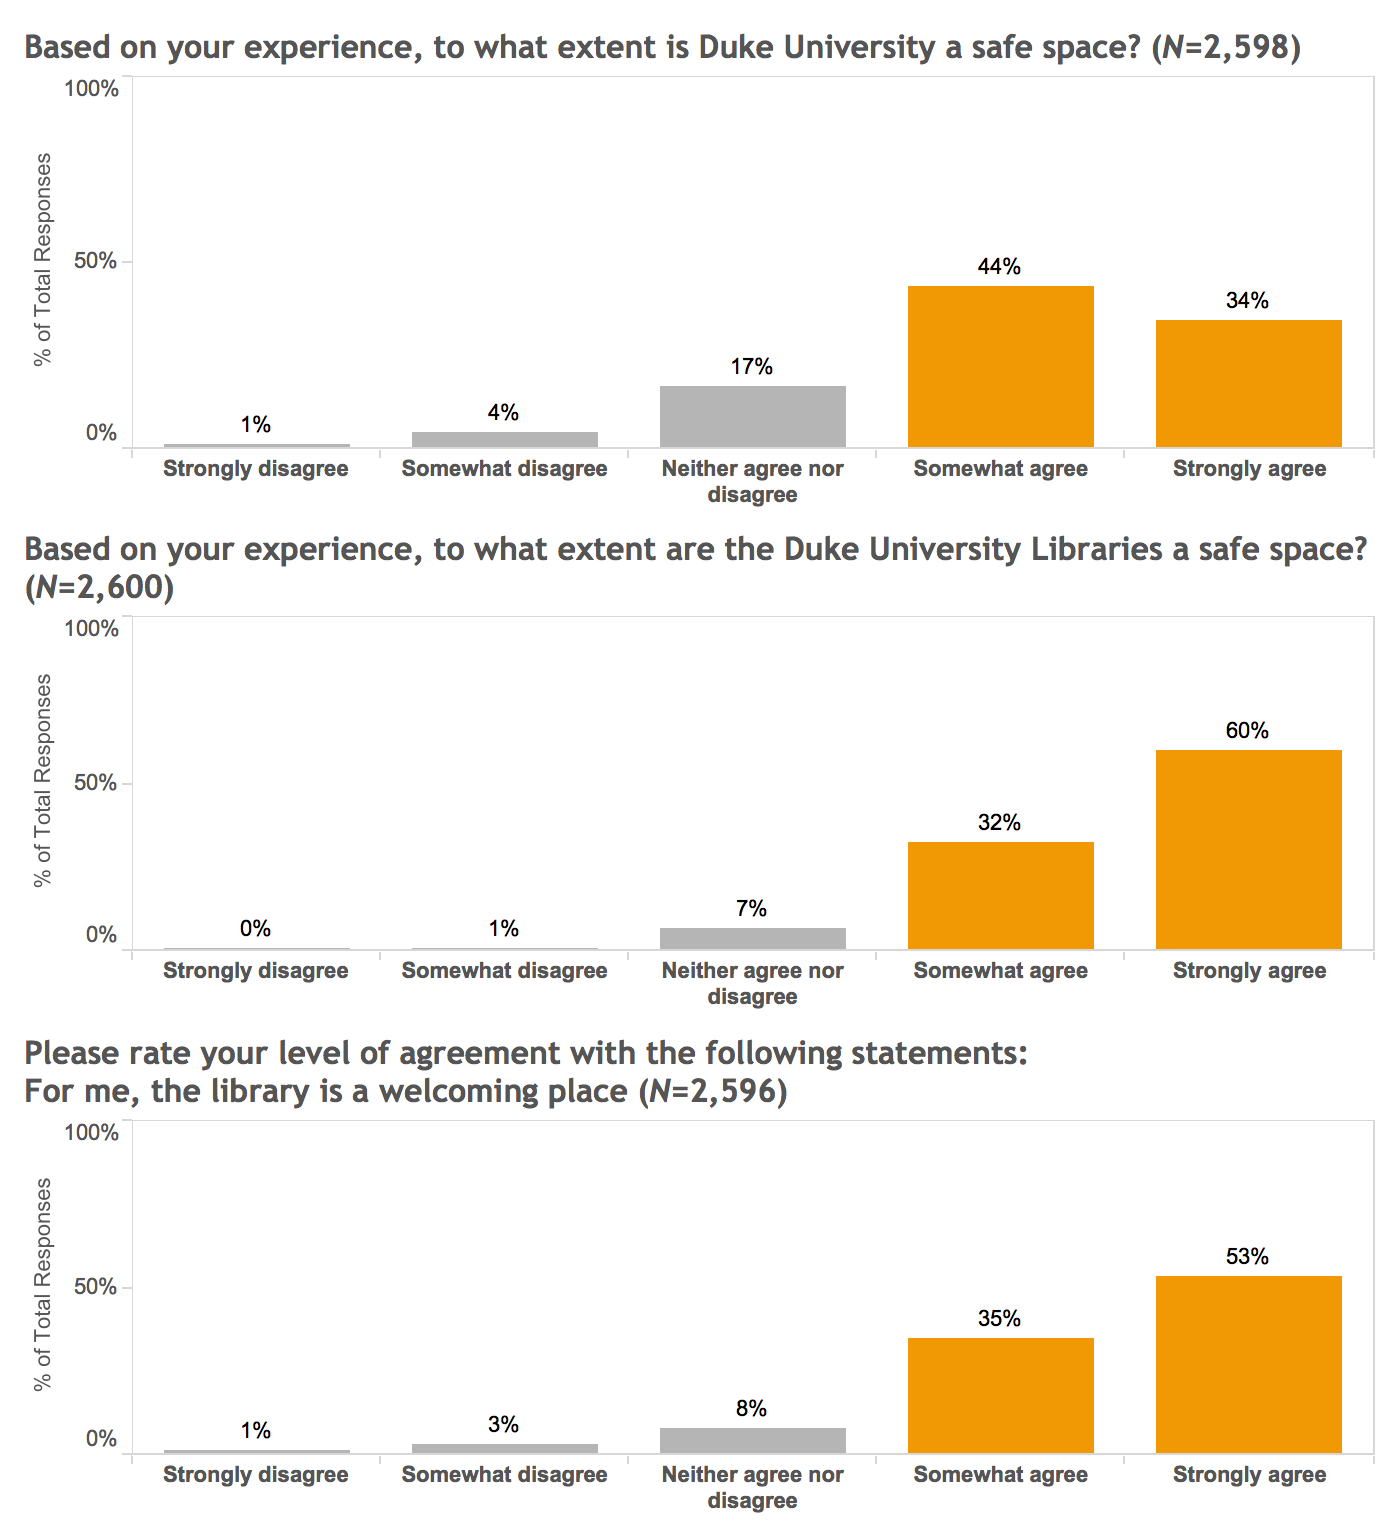 Three related bar charts. The first chart shows that when asked if Duke University is a safe space, 44% somewhat agree and 34% strongly agree. The second chart shows that when asked if the Duke Libraries are a safe space, 32% somewhat agree and 60% strongly agree. The third chart shows that when asked if the library is a welcoming place, 35% somewhat agree and 53% strongly agree.